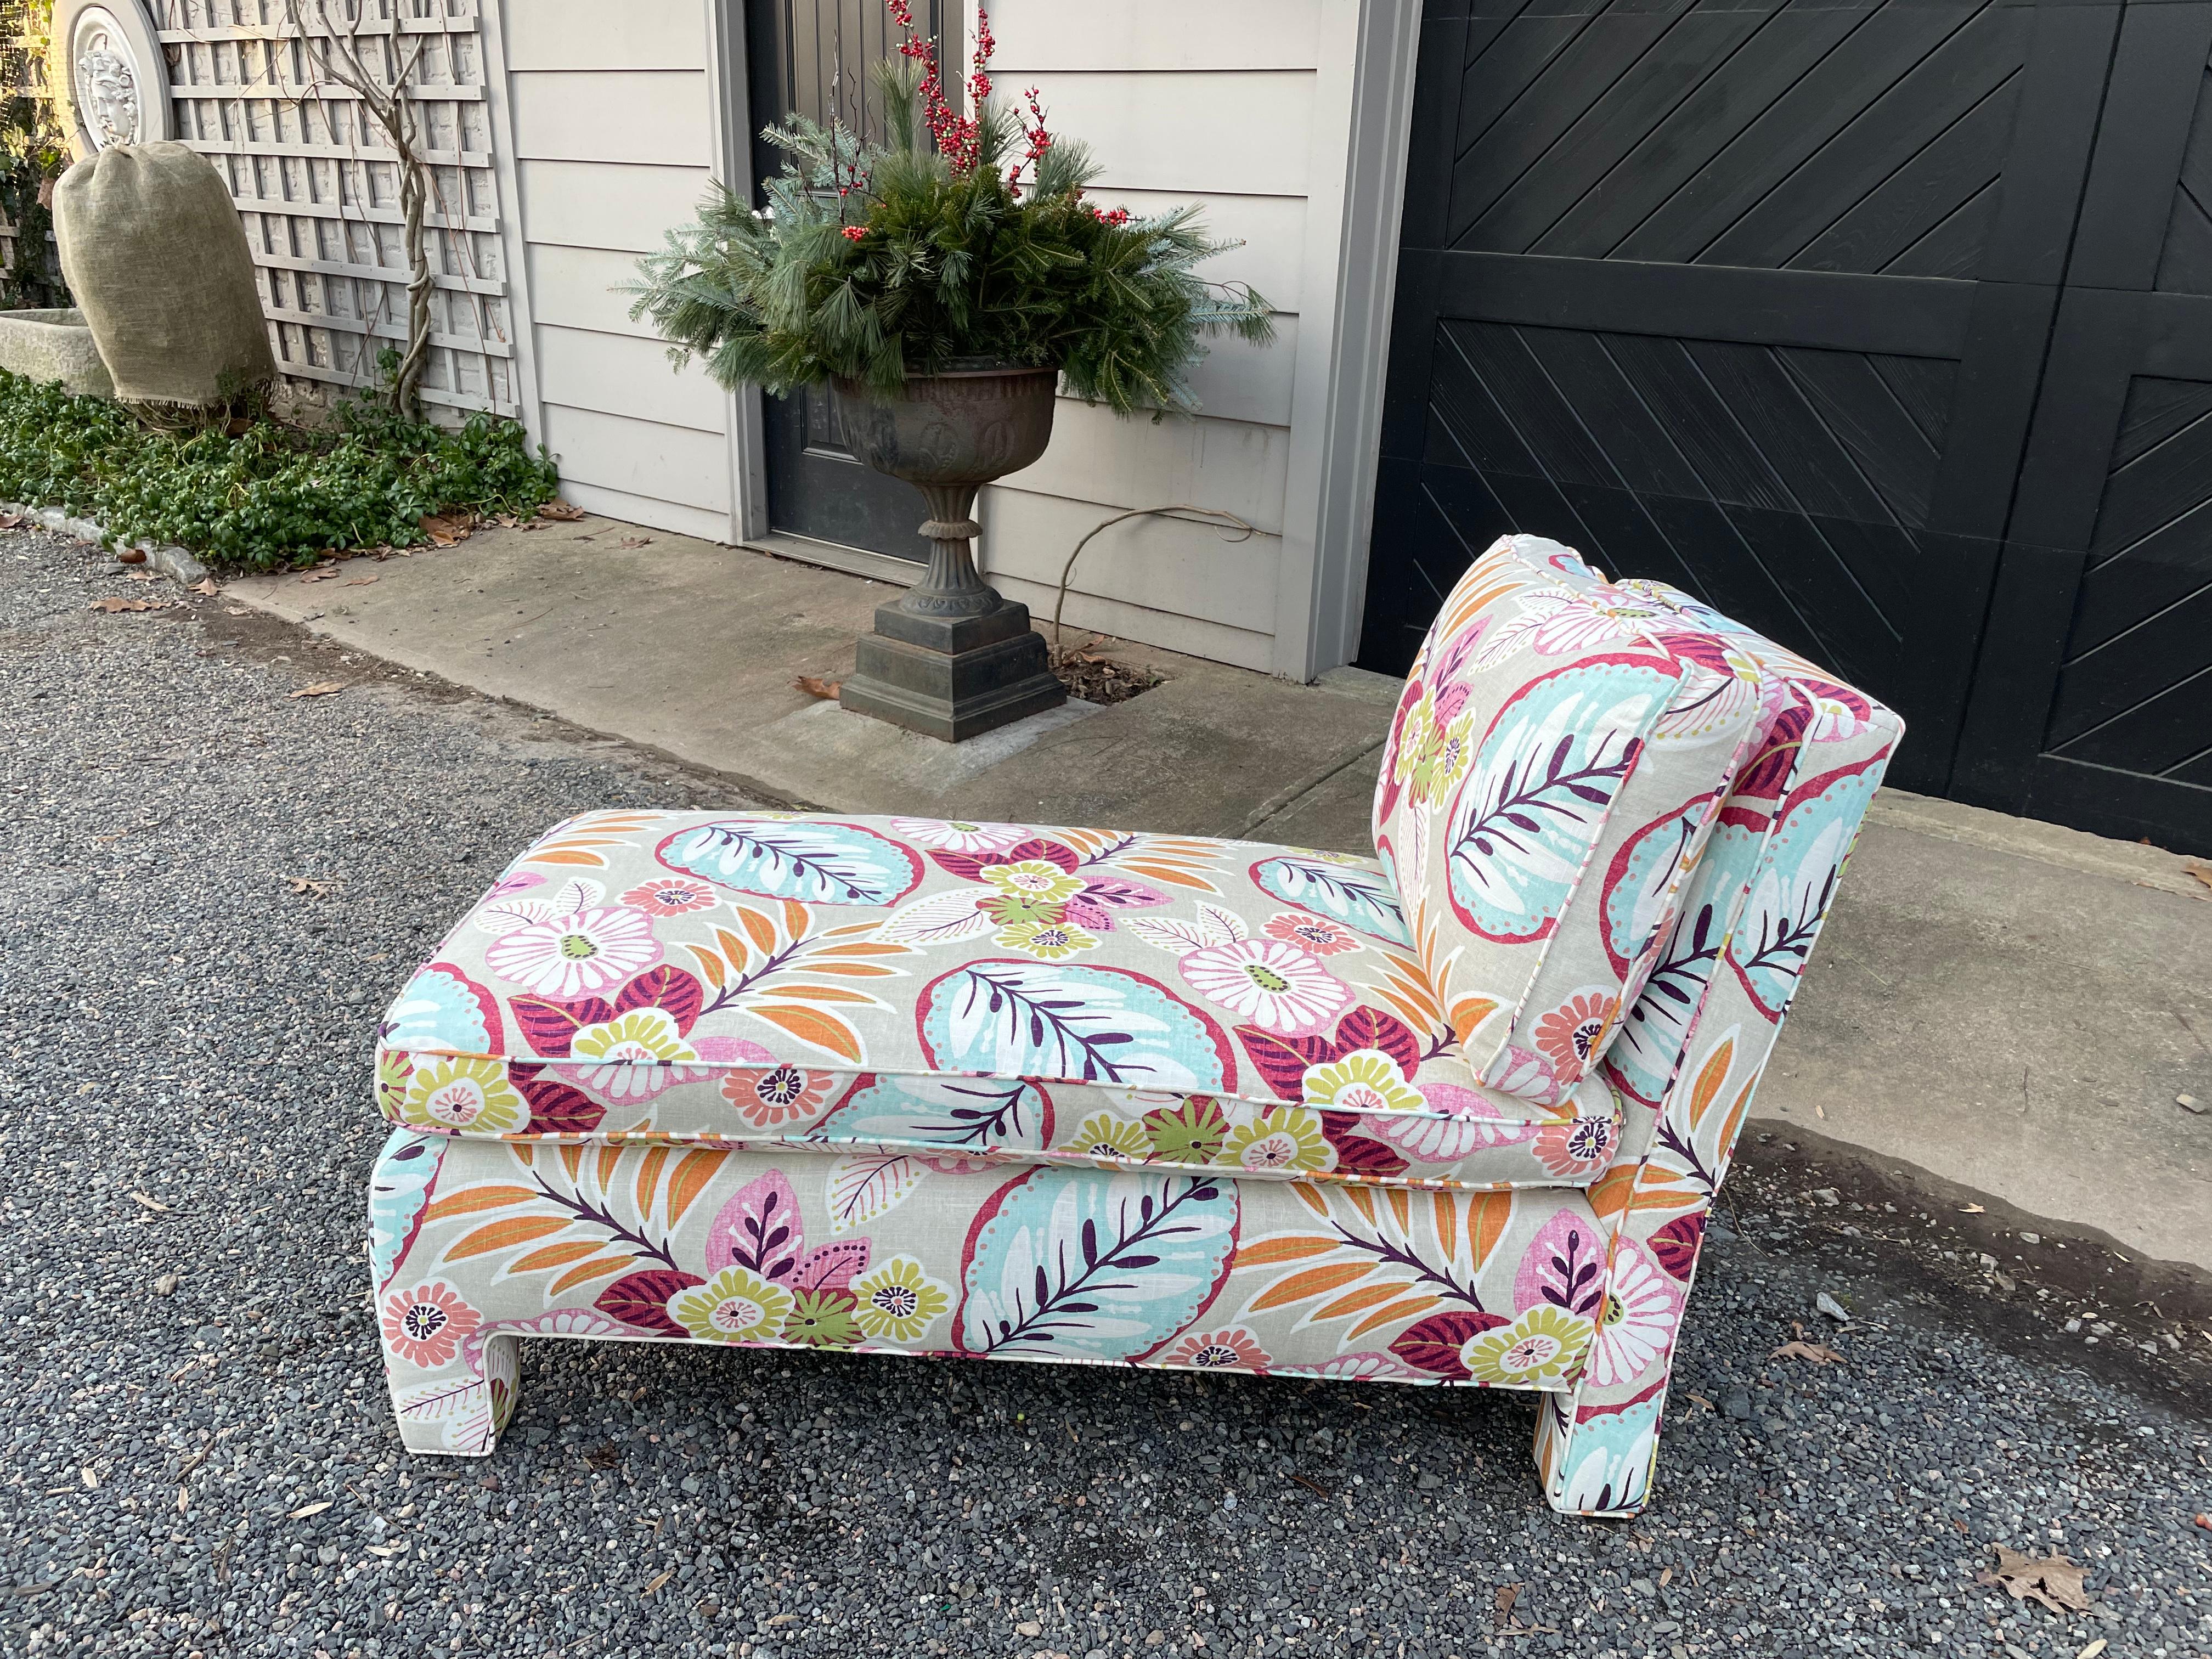 Super stylish updated mid century modern chaise lounge upholstered in a smashing contemporary floral linen having taupe background and wonderful palette of turquoise, pink, rasberry, lime green and orange.